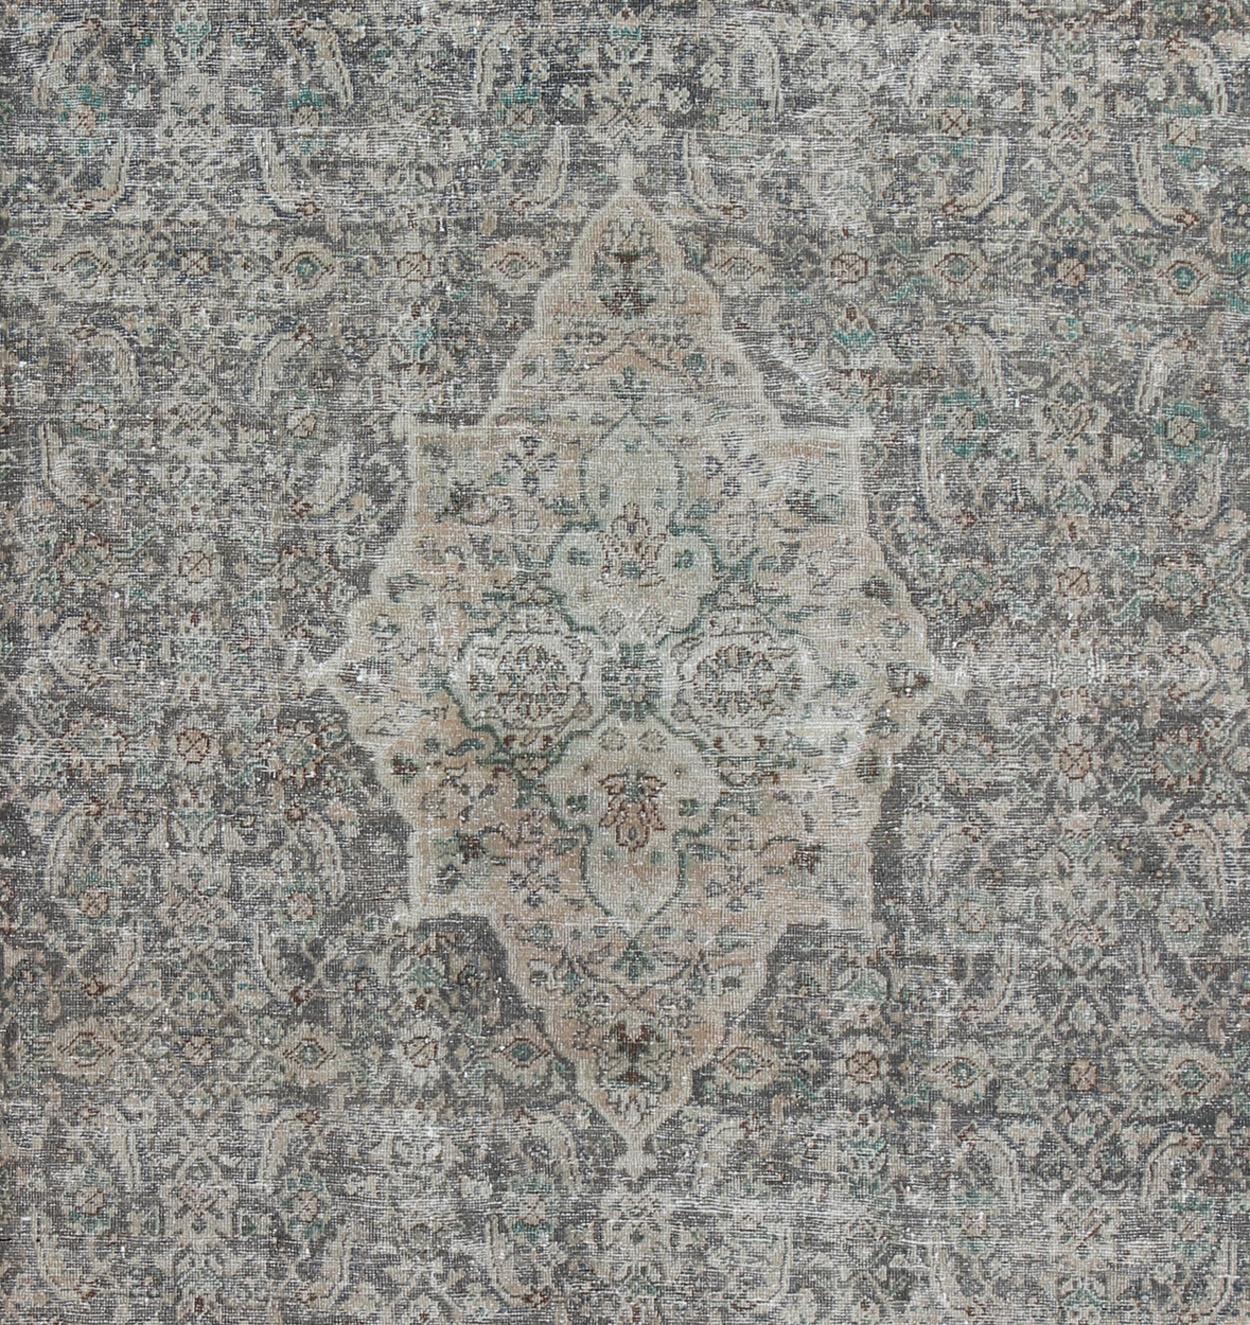 Measures: 10'5 x 13'4

This antique Persian Mahal rug with an understated medallion design has been distressed and features a unique color combination with soft gray, taupe, green, light brown accents and blush/pink border.

Country of Origin: